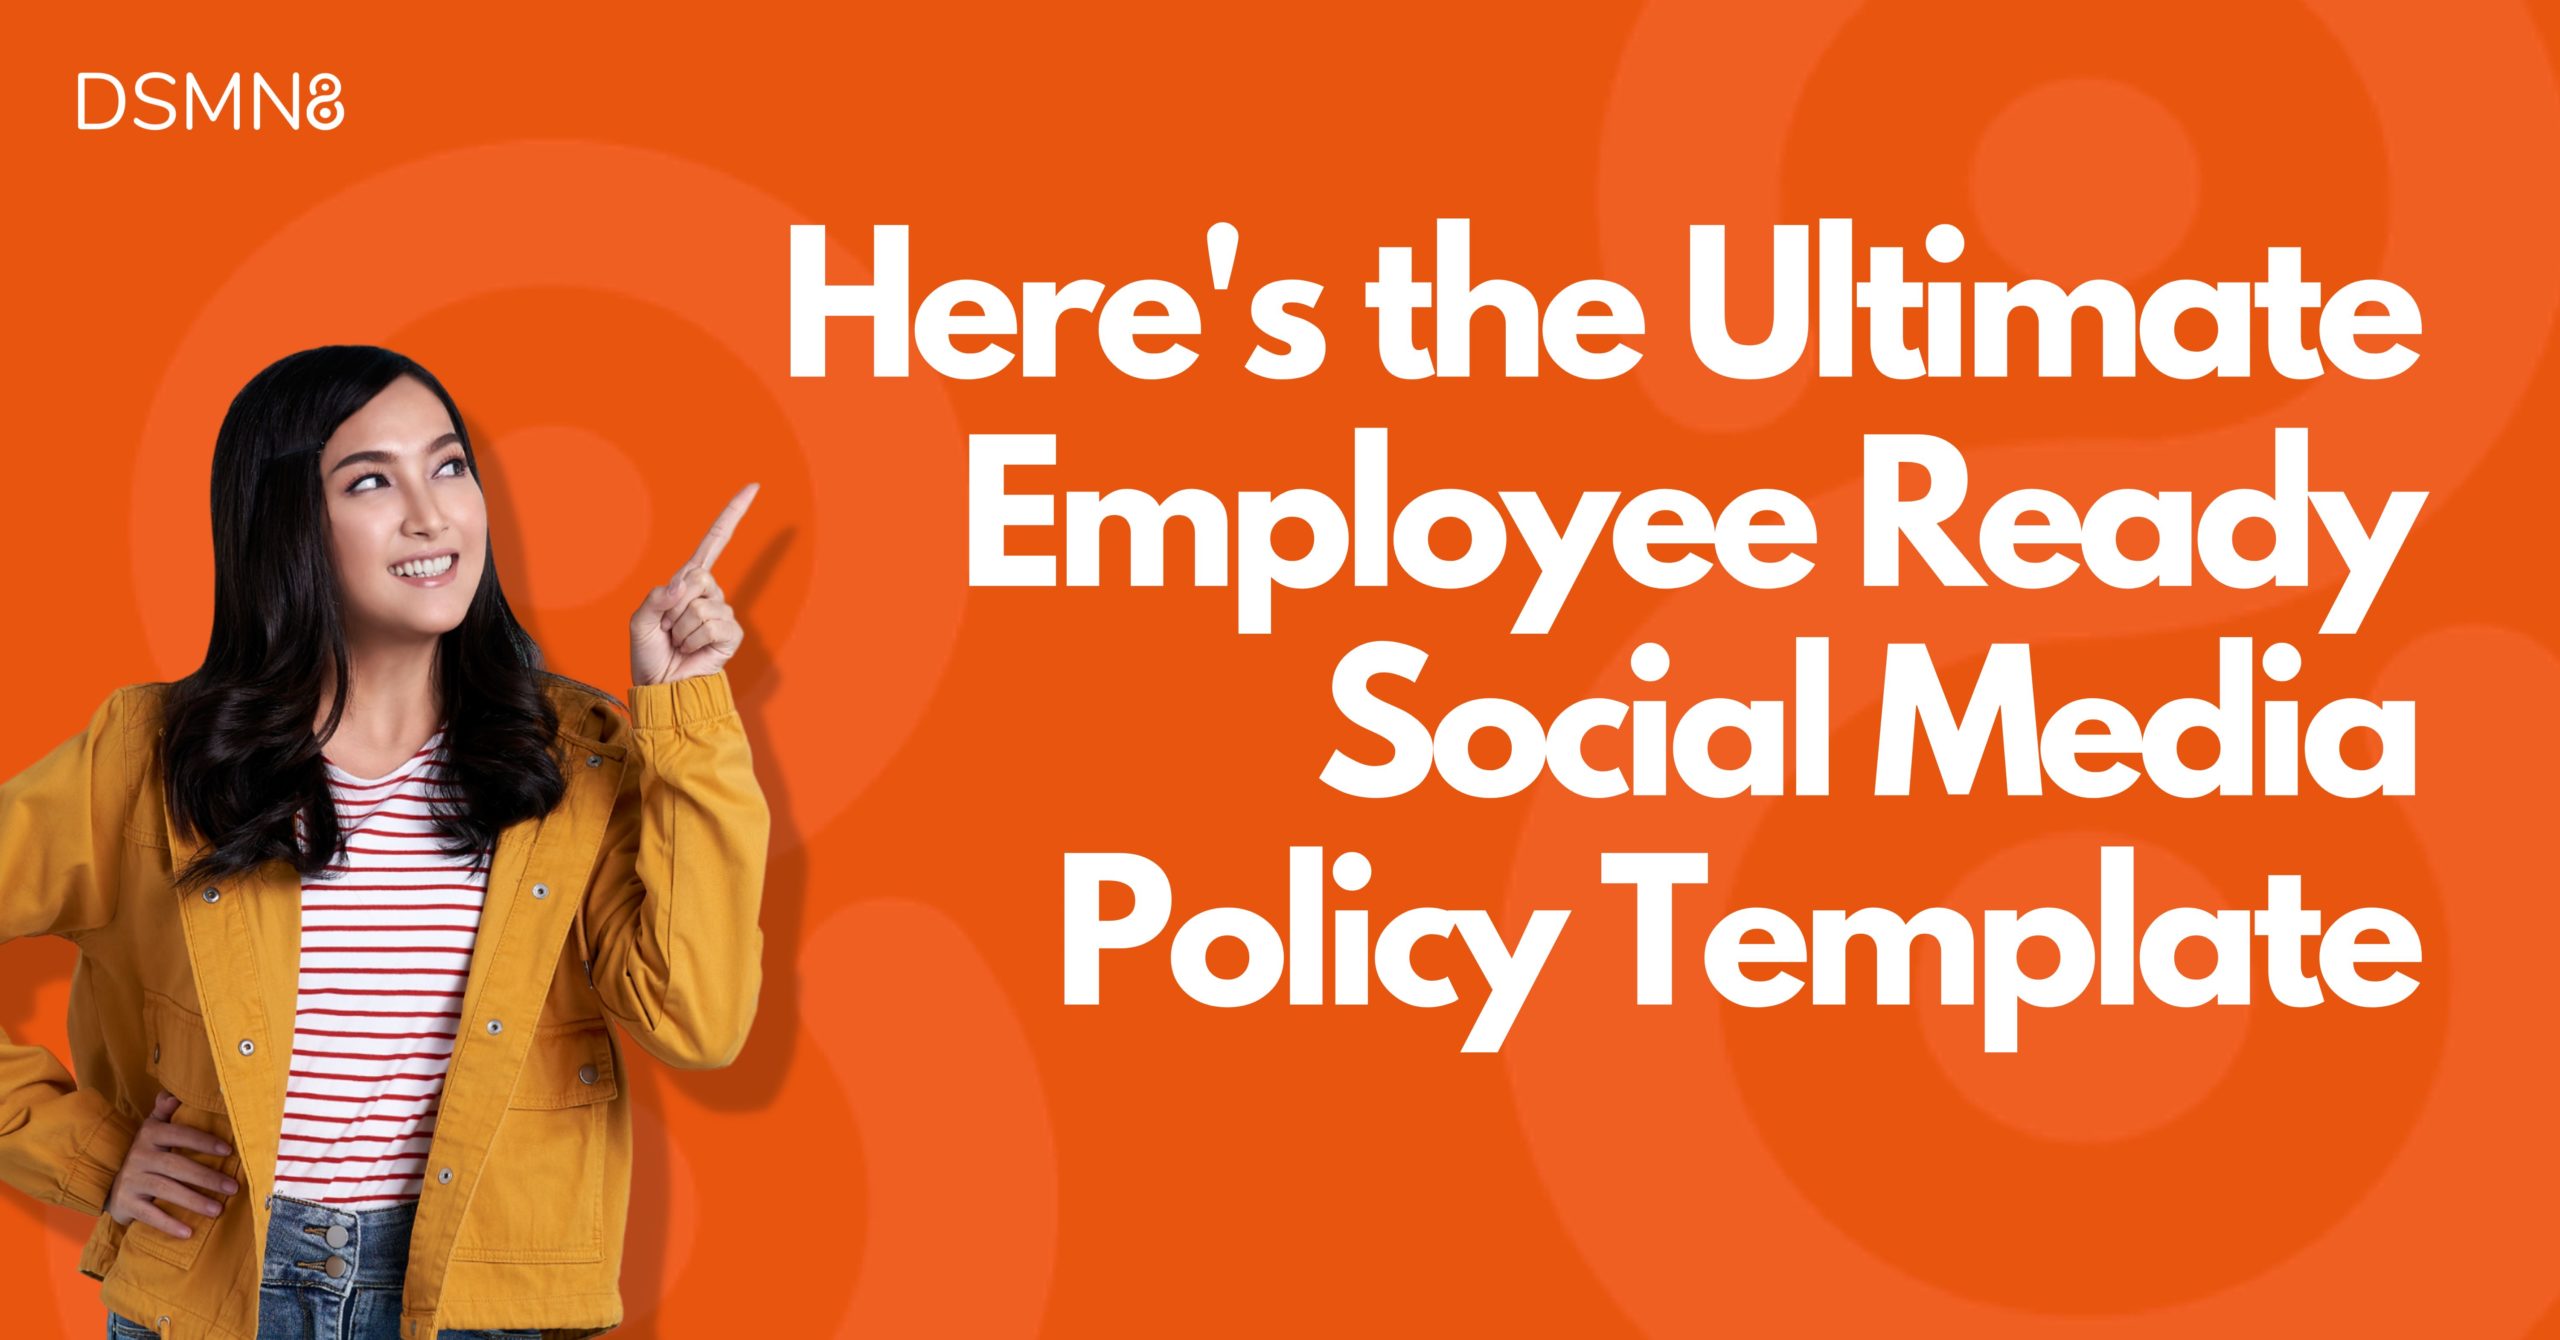 The Ultimate Employee Ready Social Media Policy Template